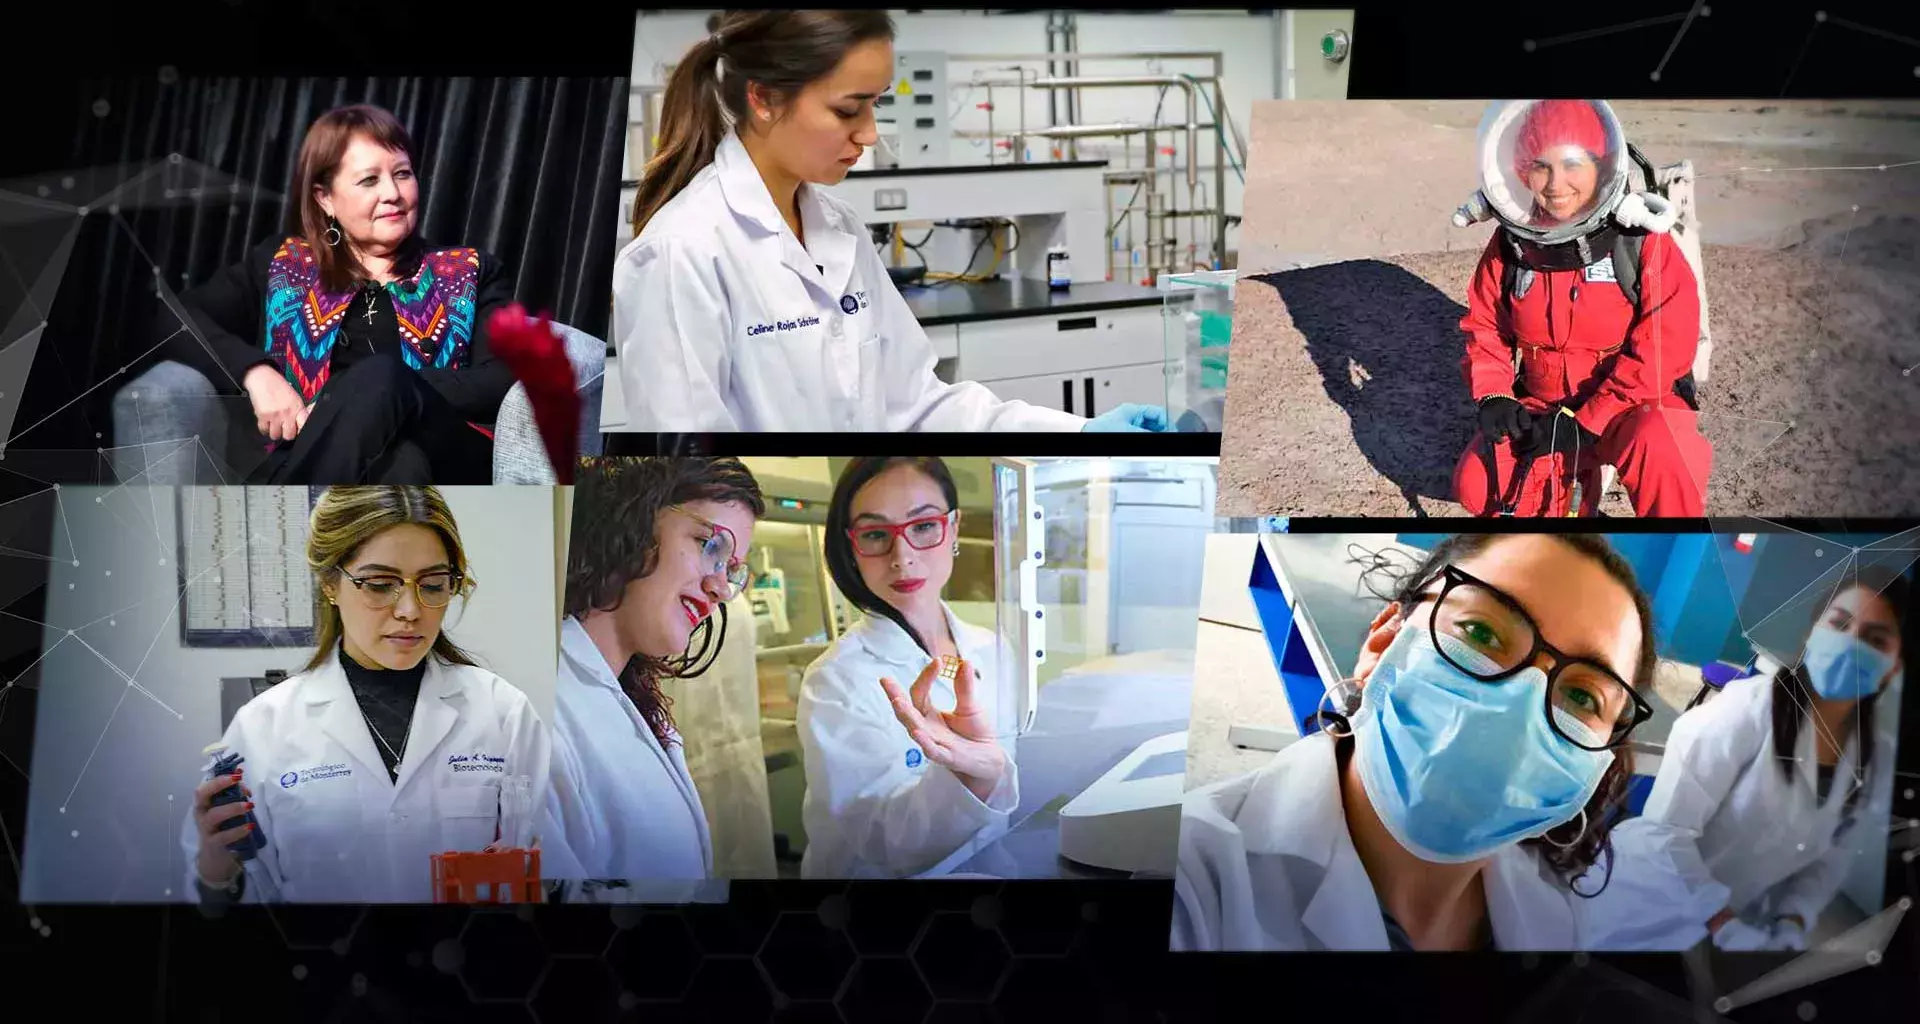 25 Mexican women whose lives are dedicated to science and technology